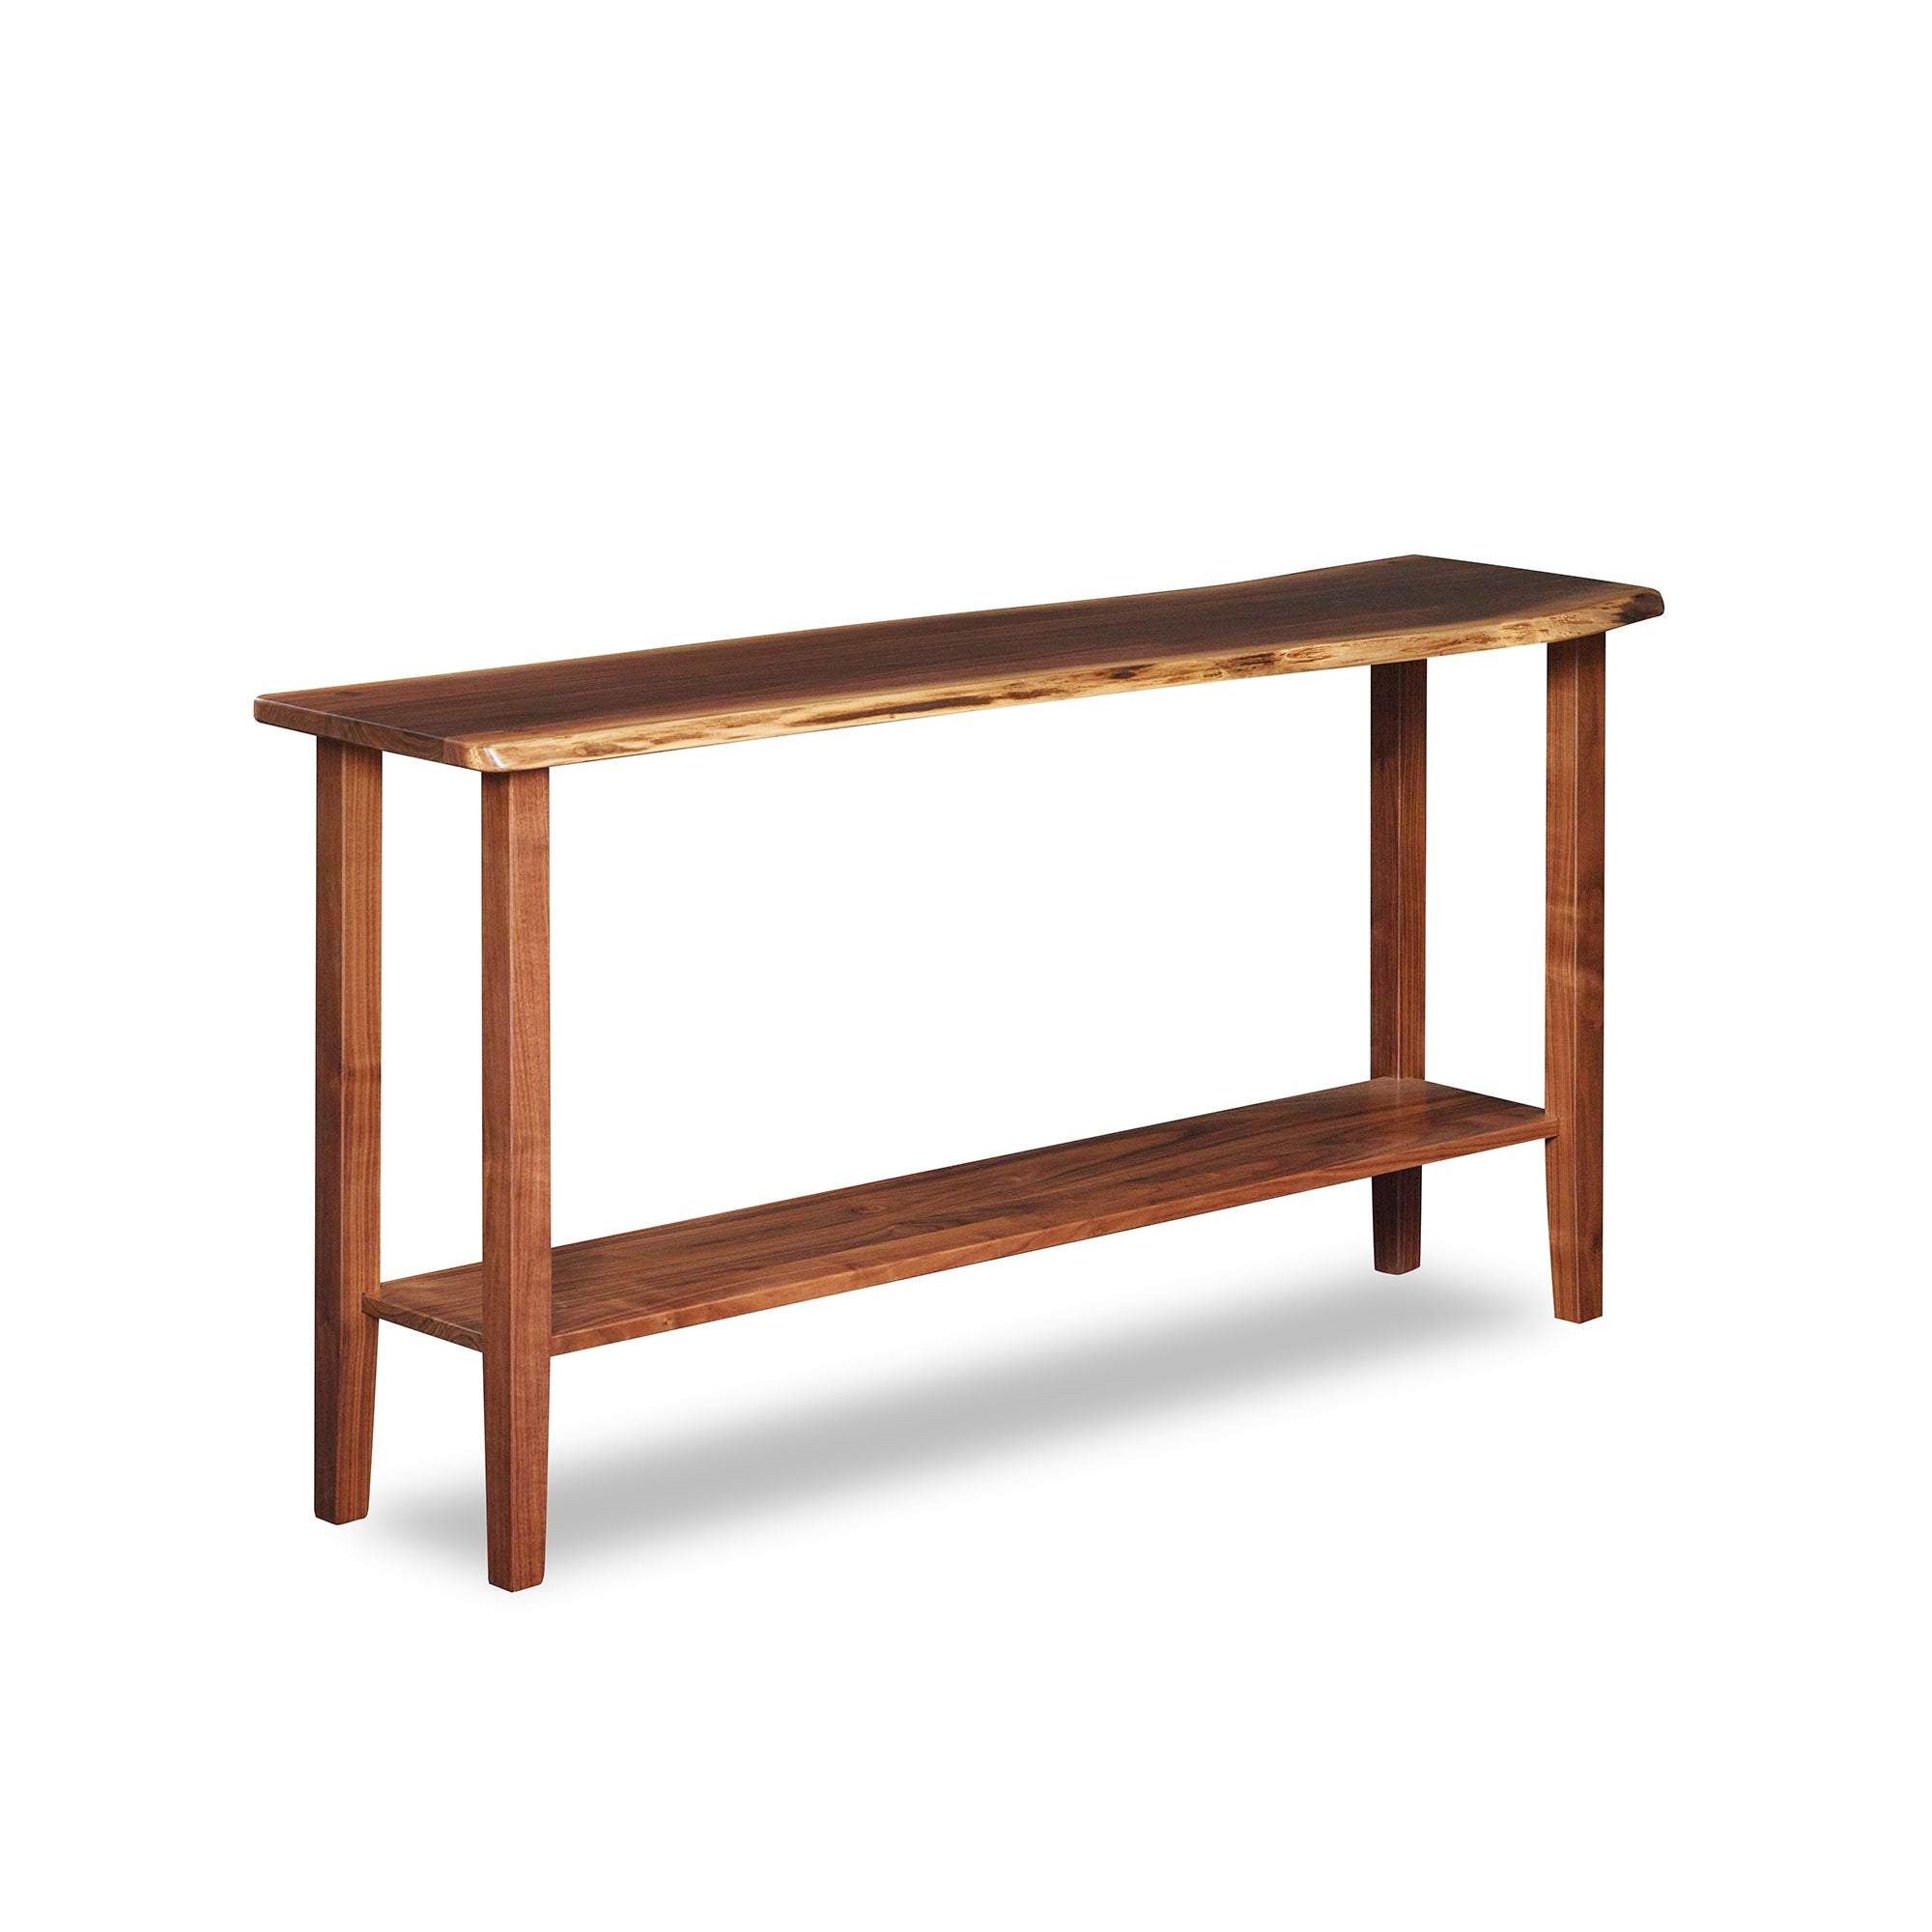 Live edge solid walnut sofa table with four post legs and low shelf, from Maine's Chilton Furniture Co.